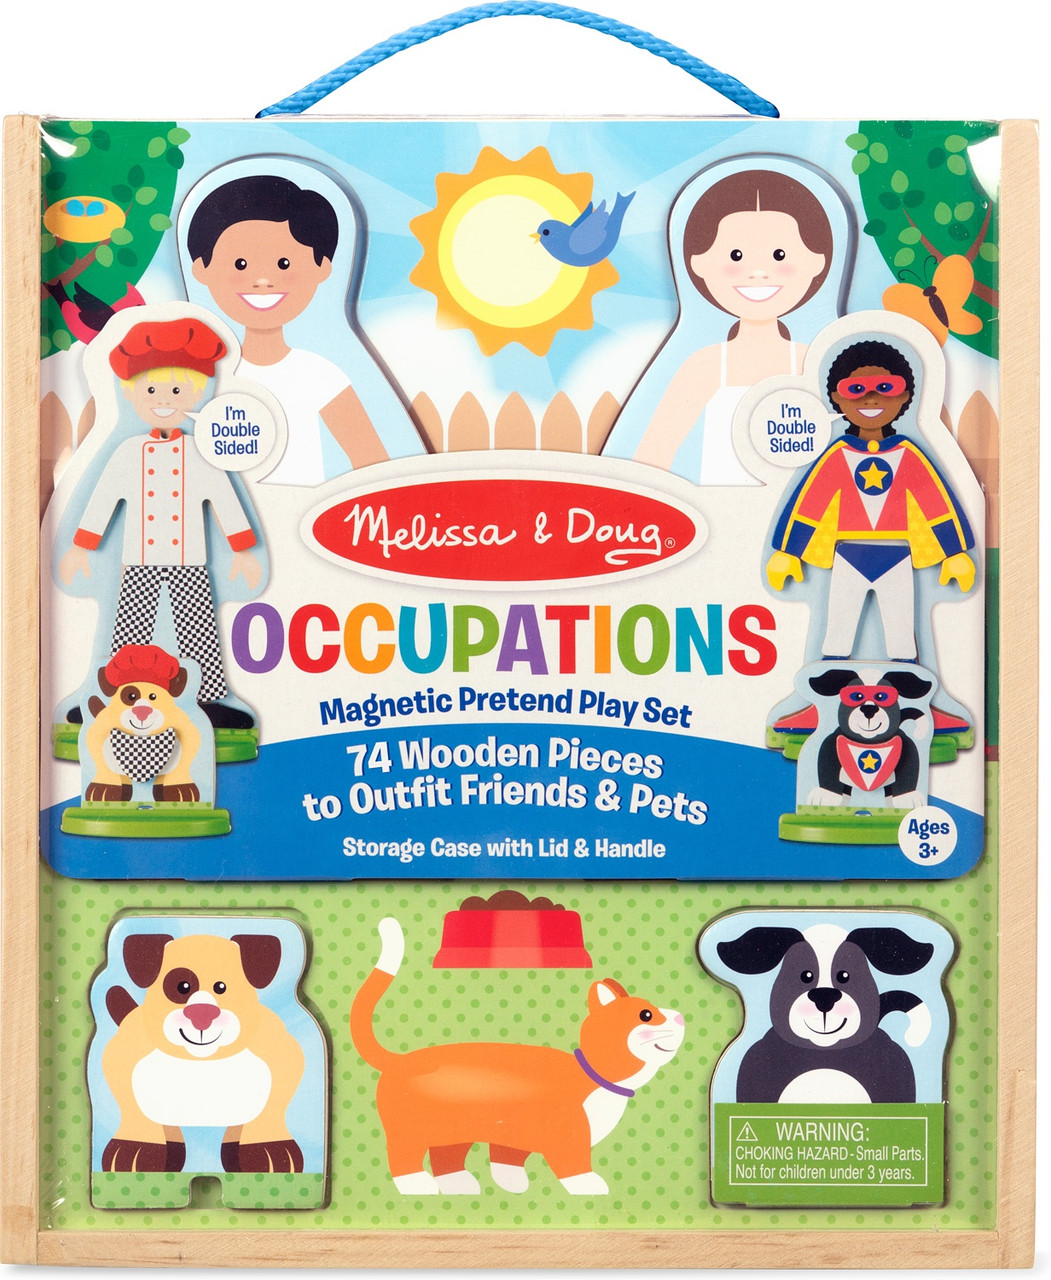 OCCUPATIONS MAGNETIC PLAY SET